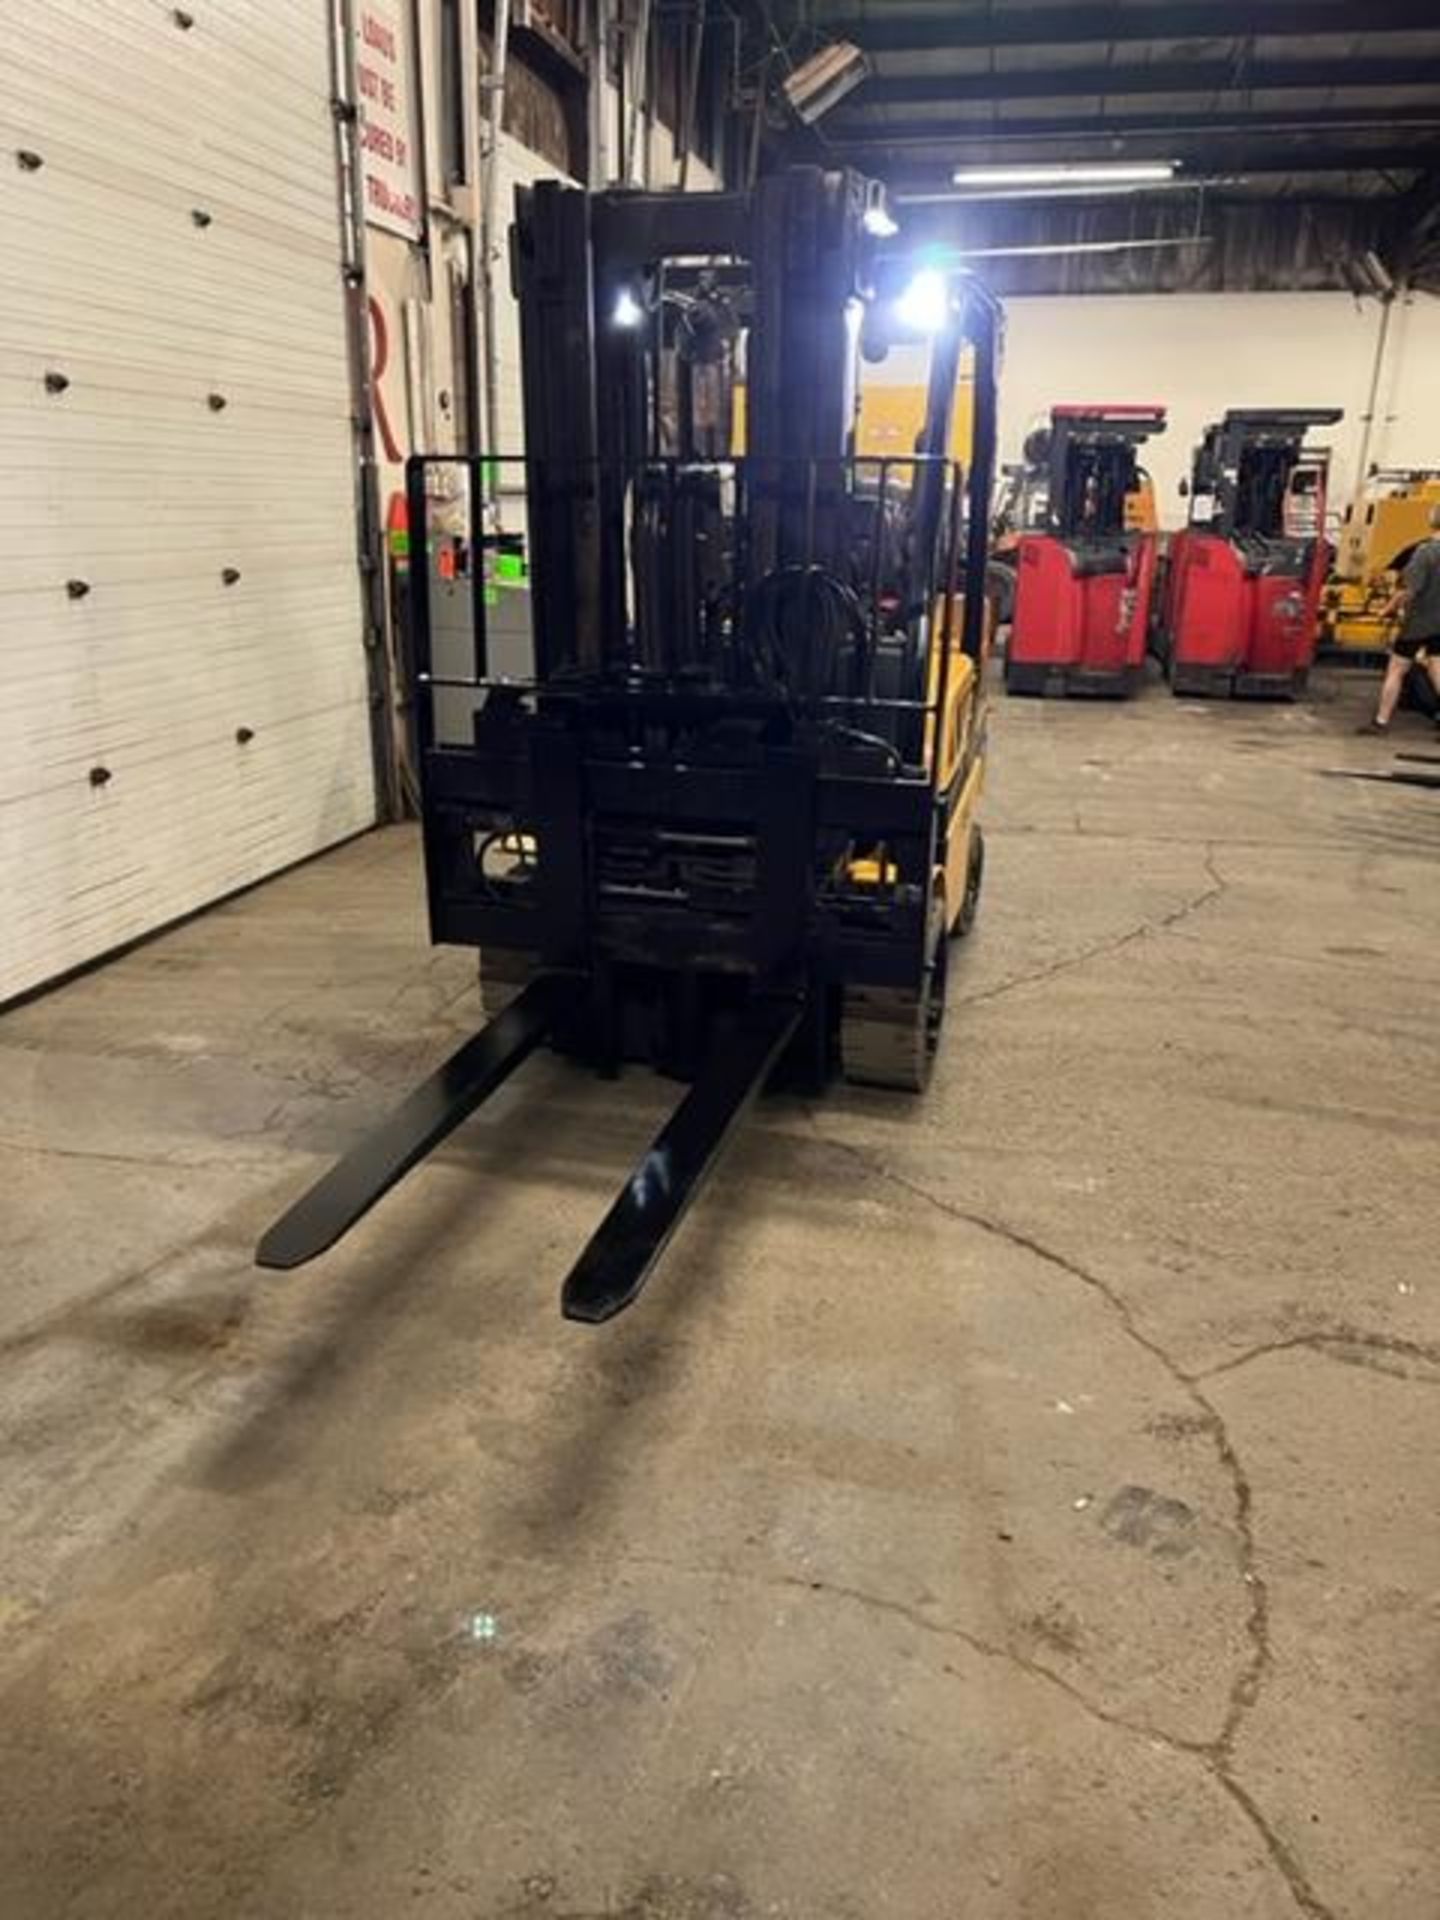 FREE CUSTOMS - NICE 2018 Yale model 80 - 8,000lbs Capacity Forklift LPG (propane) with 54" forks - Image 2 of 4